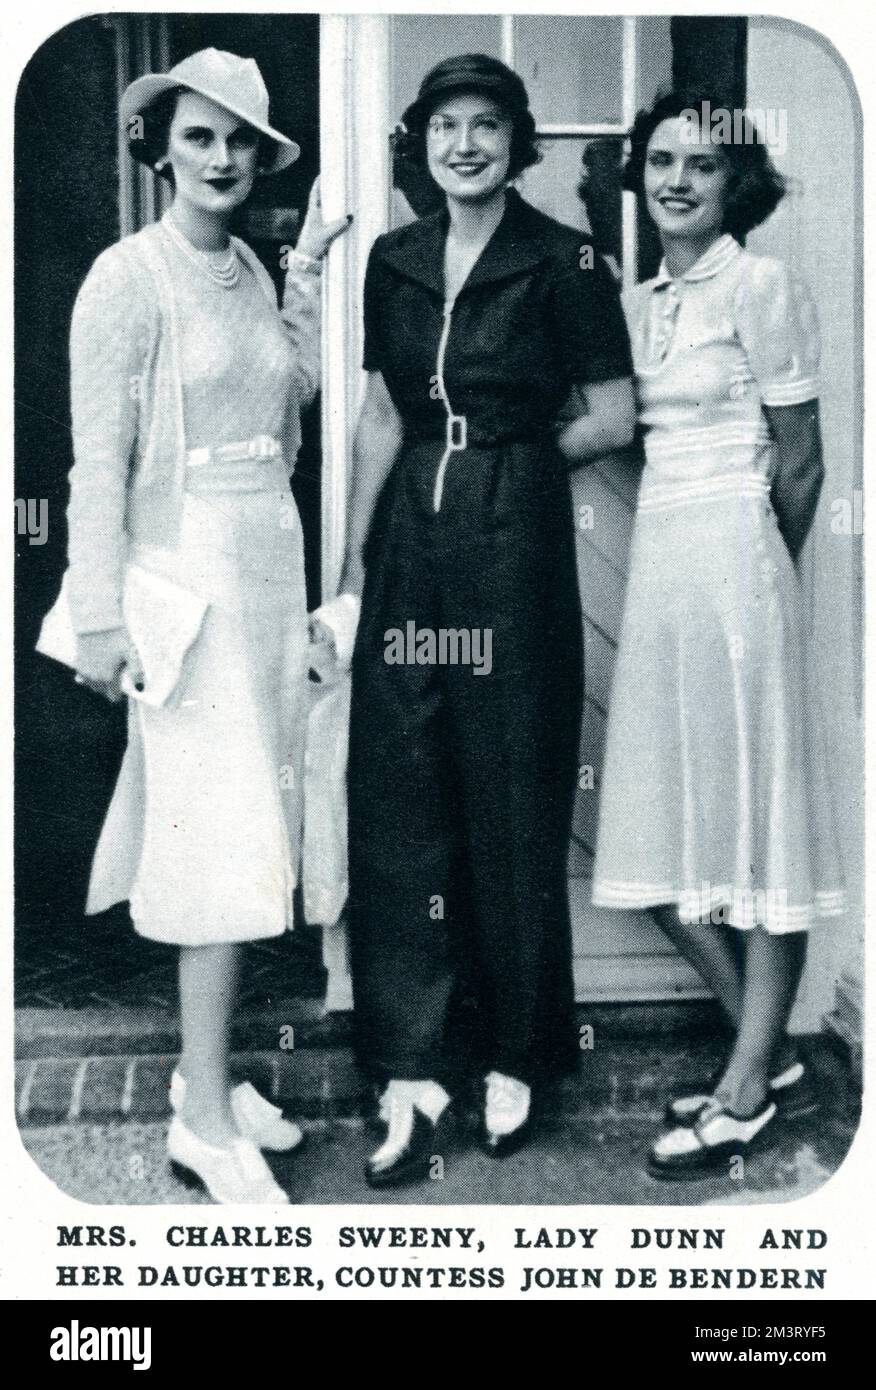 Mrs Charles Sweeny, looking as chic as ever, with Lady Dunn (rocking a rather fabulous jumpsuit) and her daughter, Countess John de Bendern at White's Club golf tournament at Sandwich, Kent in July 1938.     Date: 1938 Stock Photo